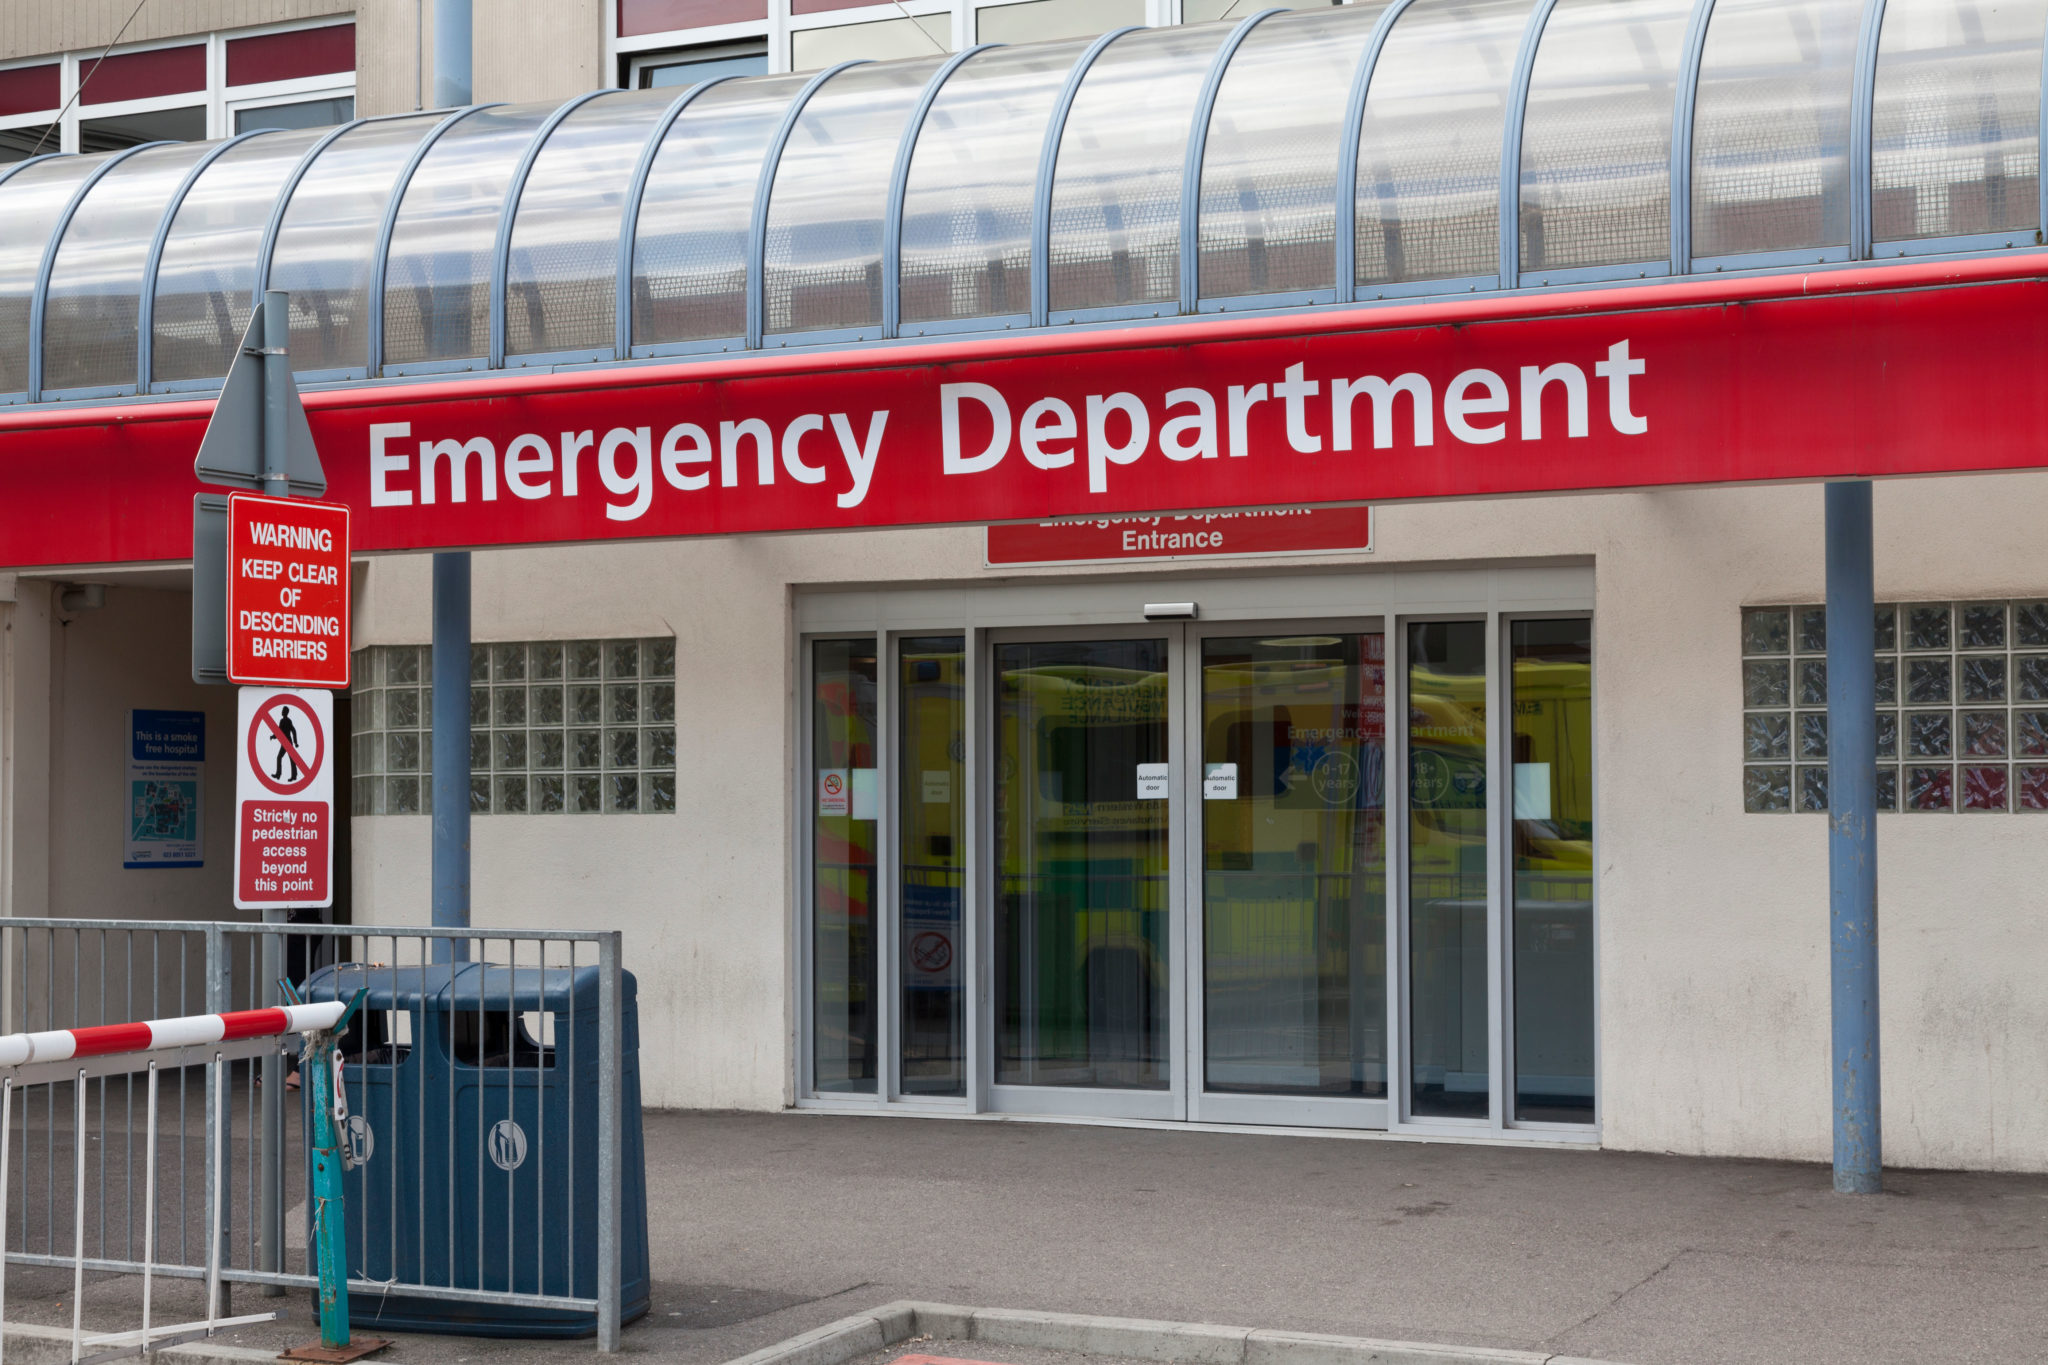 File photo shows an Emergency Department entrance in August 2012.